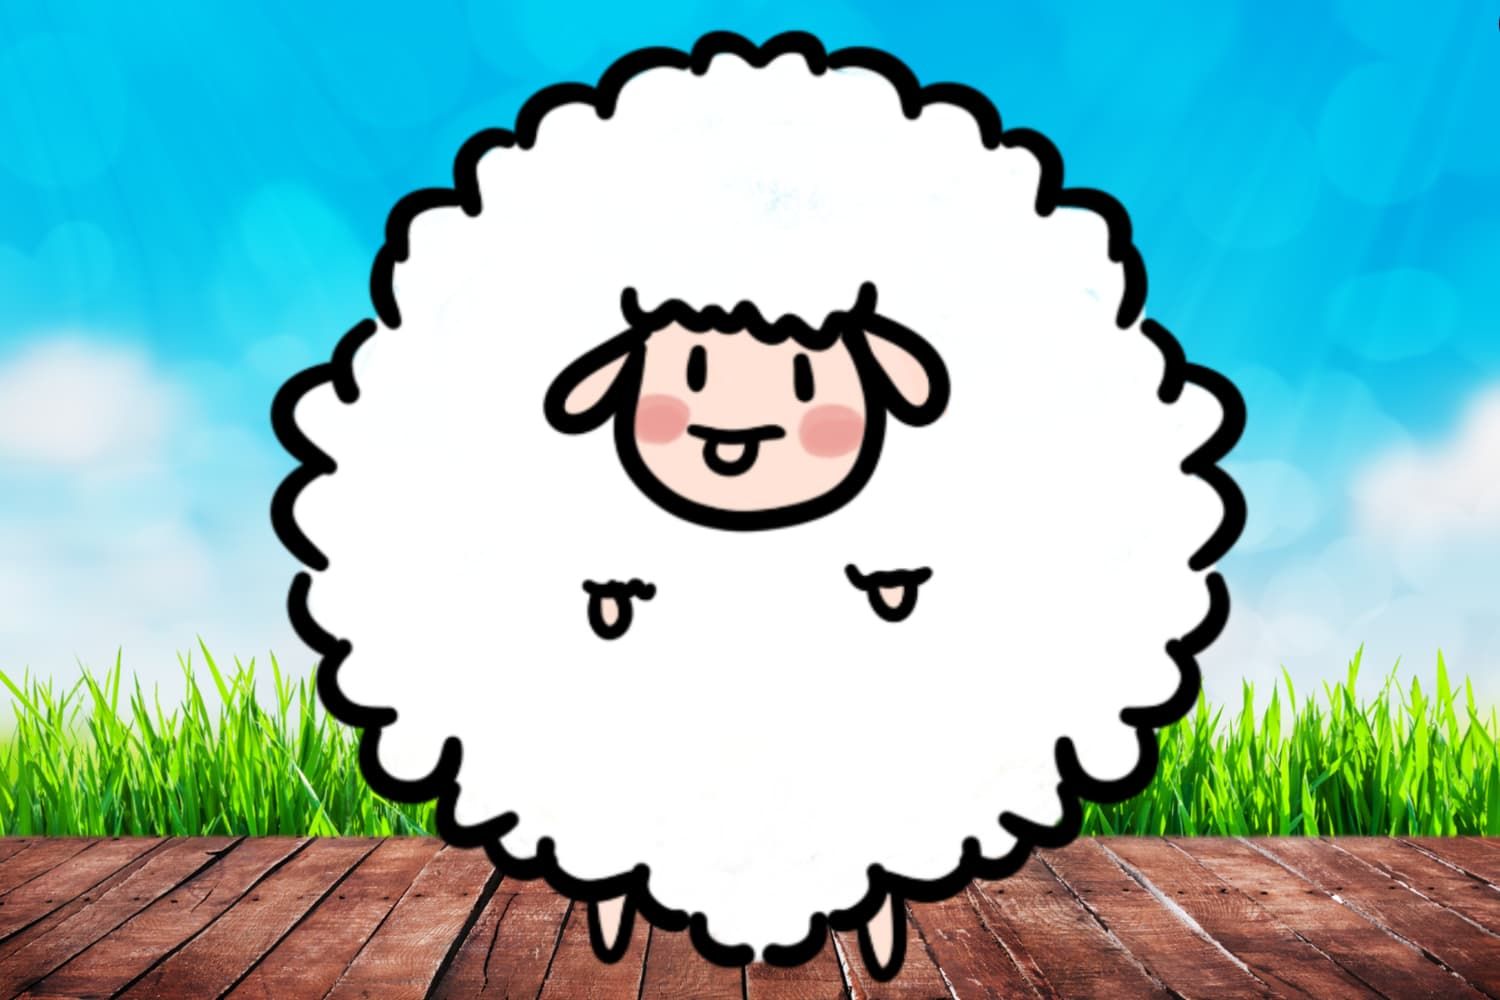 Walk-in%20activity%20-%20OT%20Psalm%2023%20-%20Make%20a%20giant%20sheep-a8365ba0 Worry / anxiety